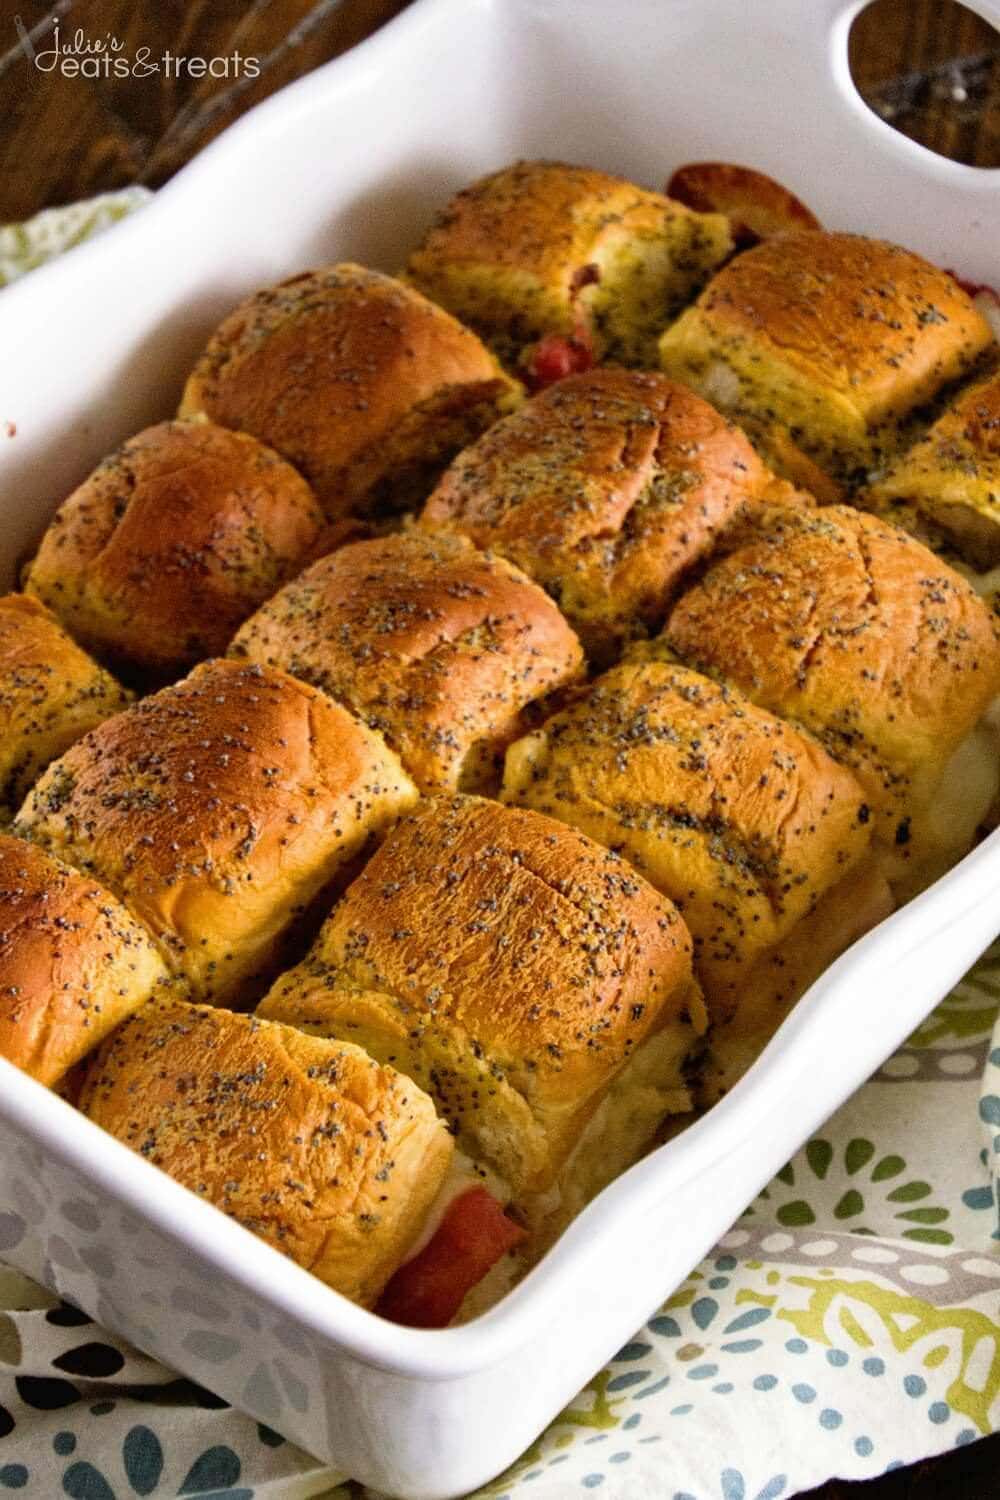 White baking dish with turkey sliders in it.